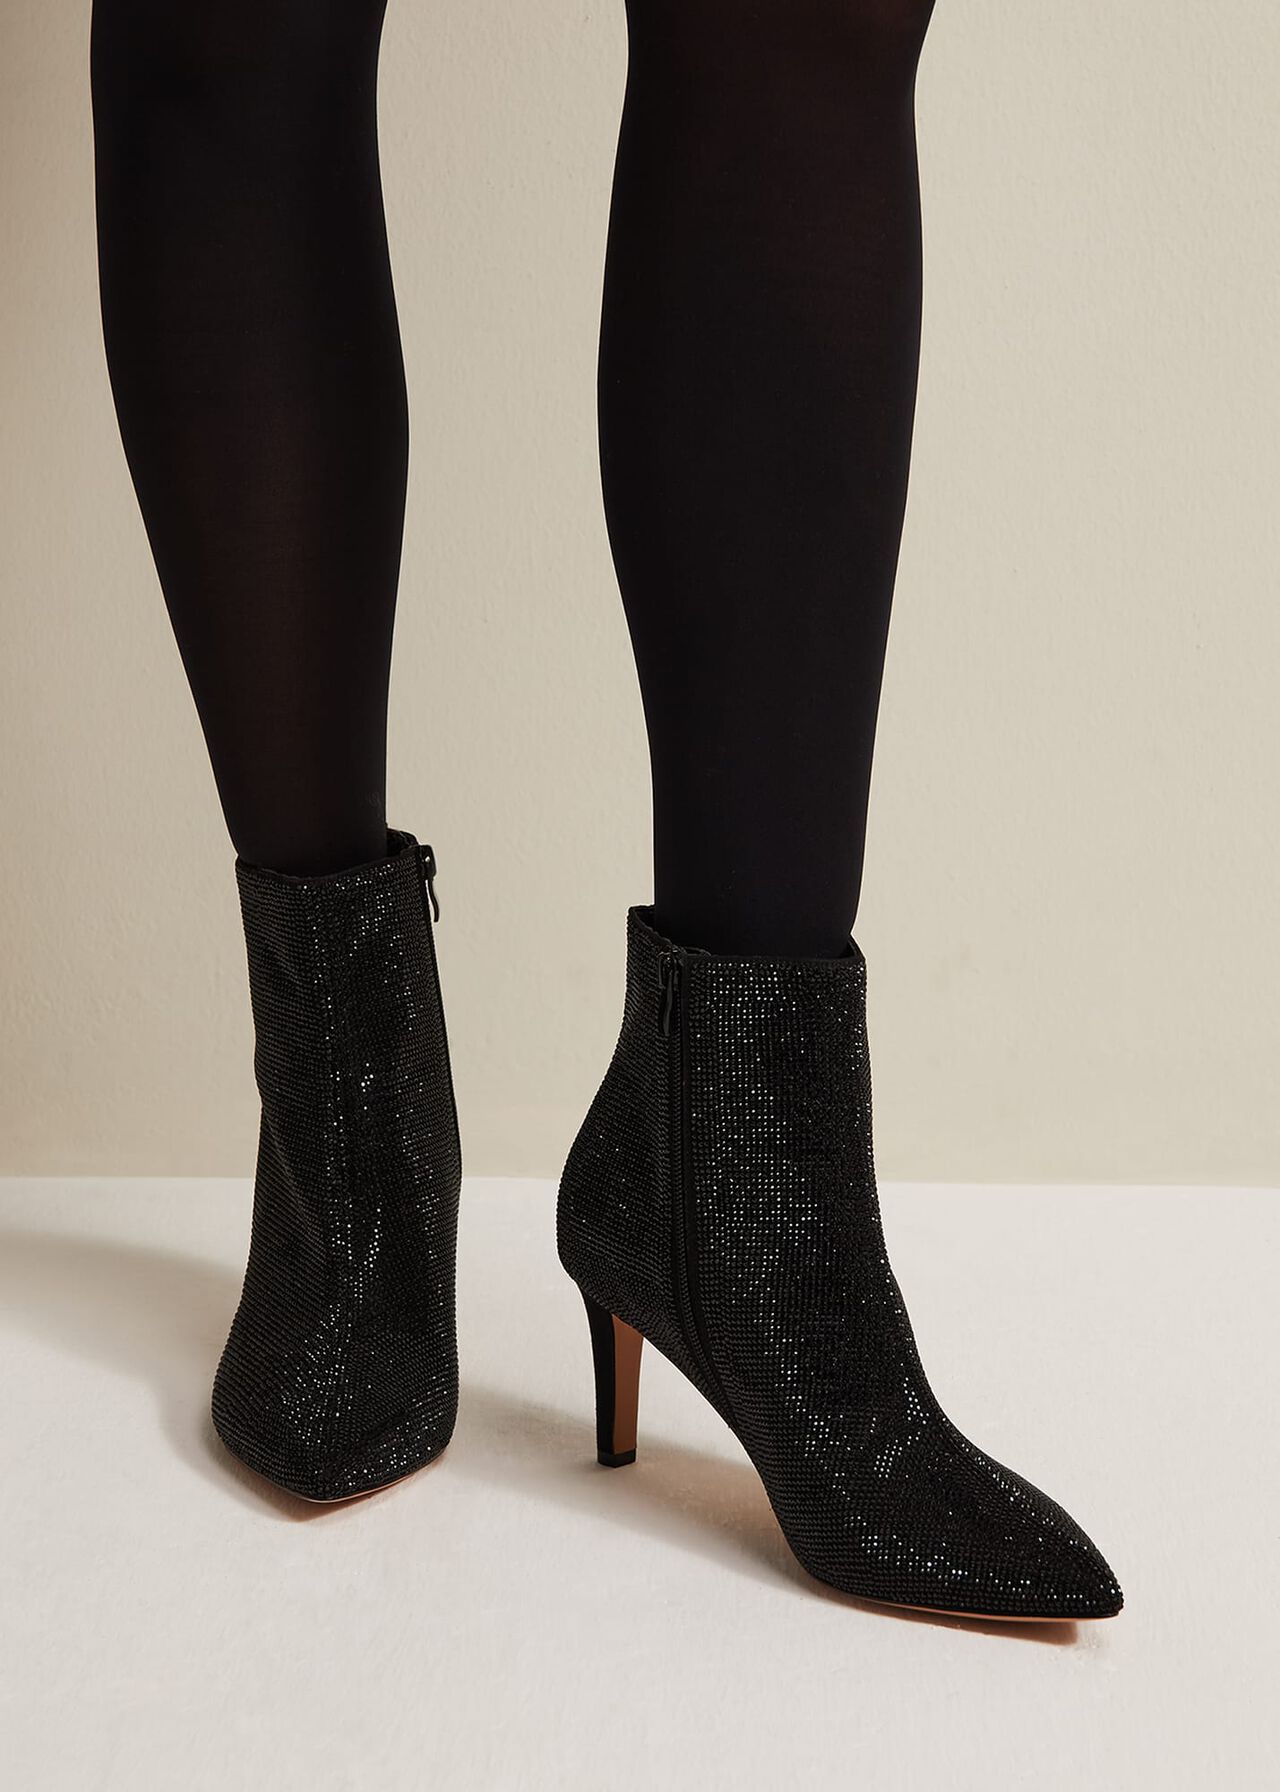 Black Sparkly Boots